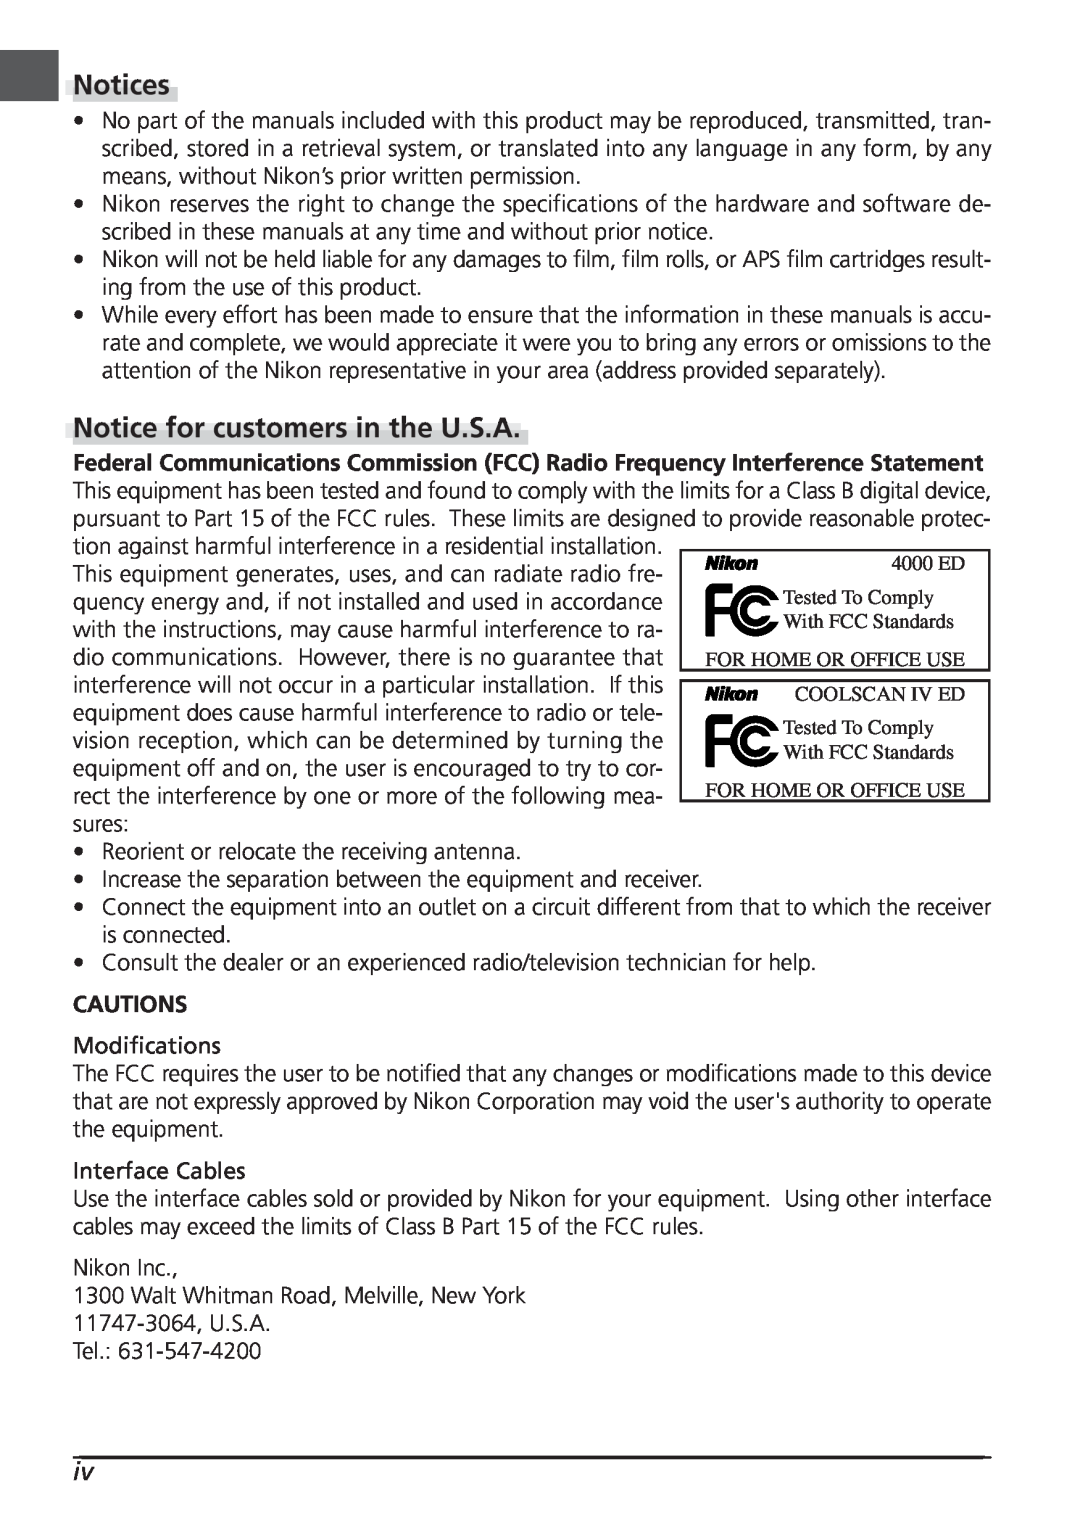 Nikon LS4000 user manual Notices, Notice for customers in the U.S.A, Cautions 